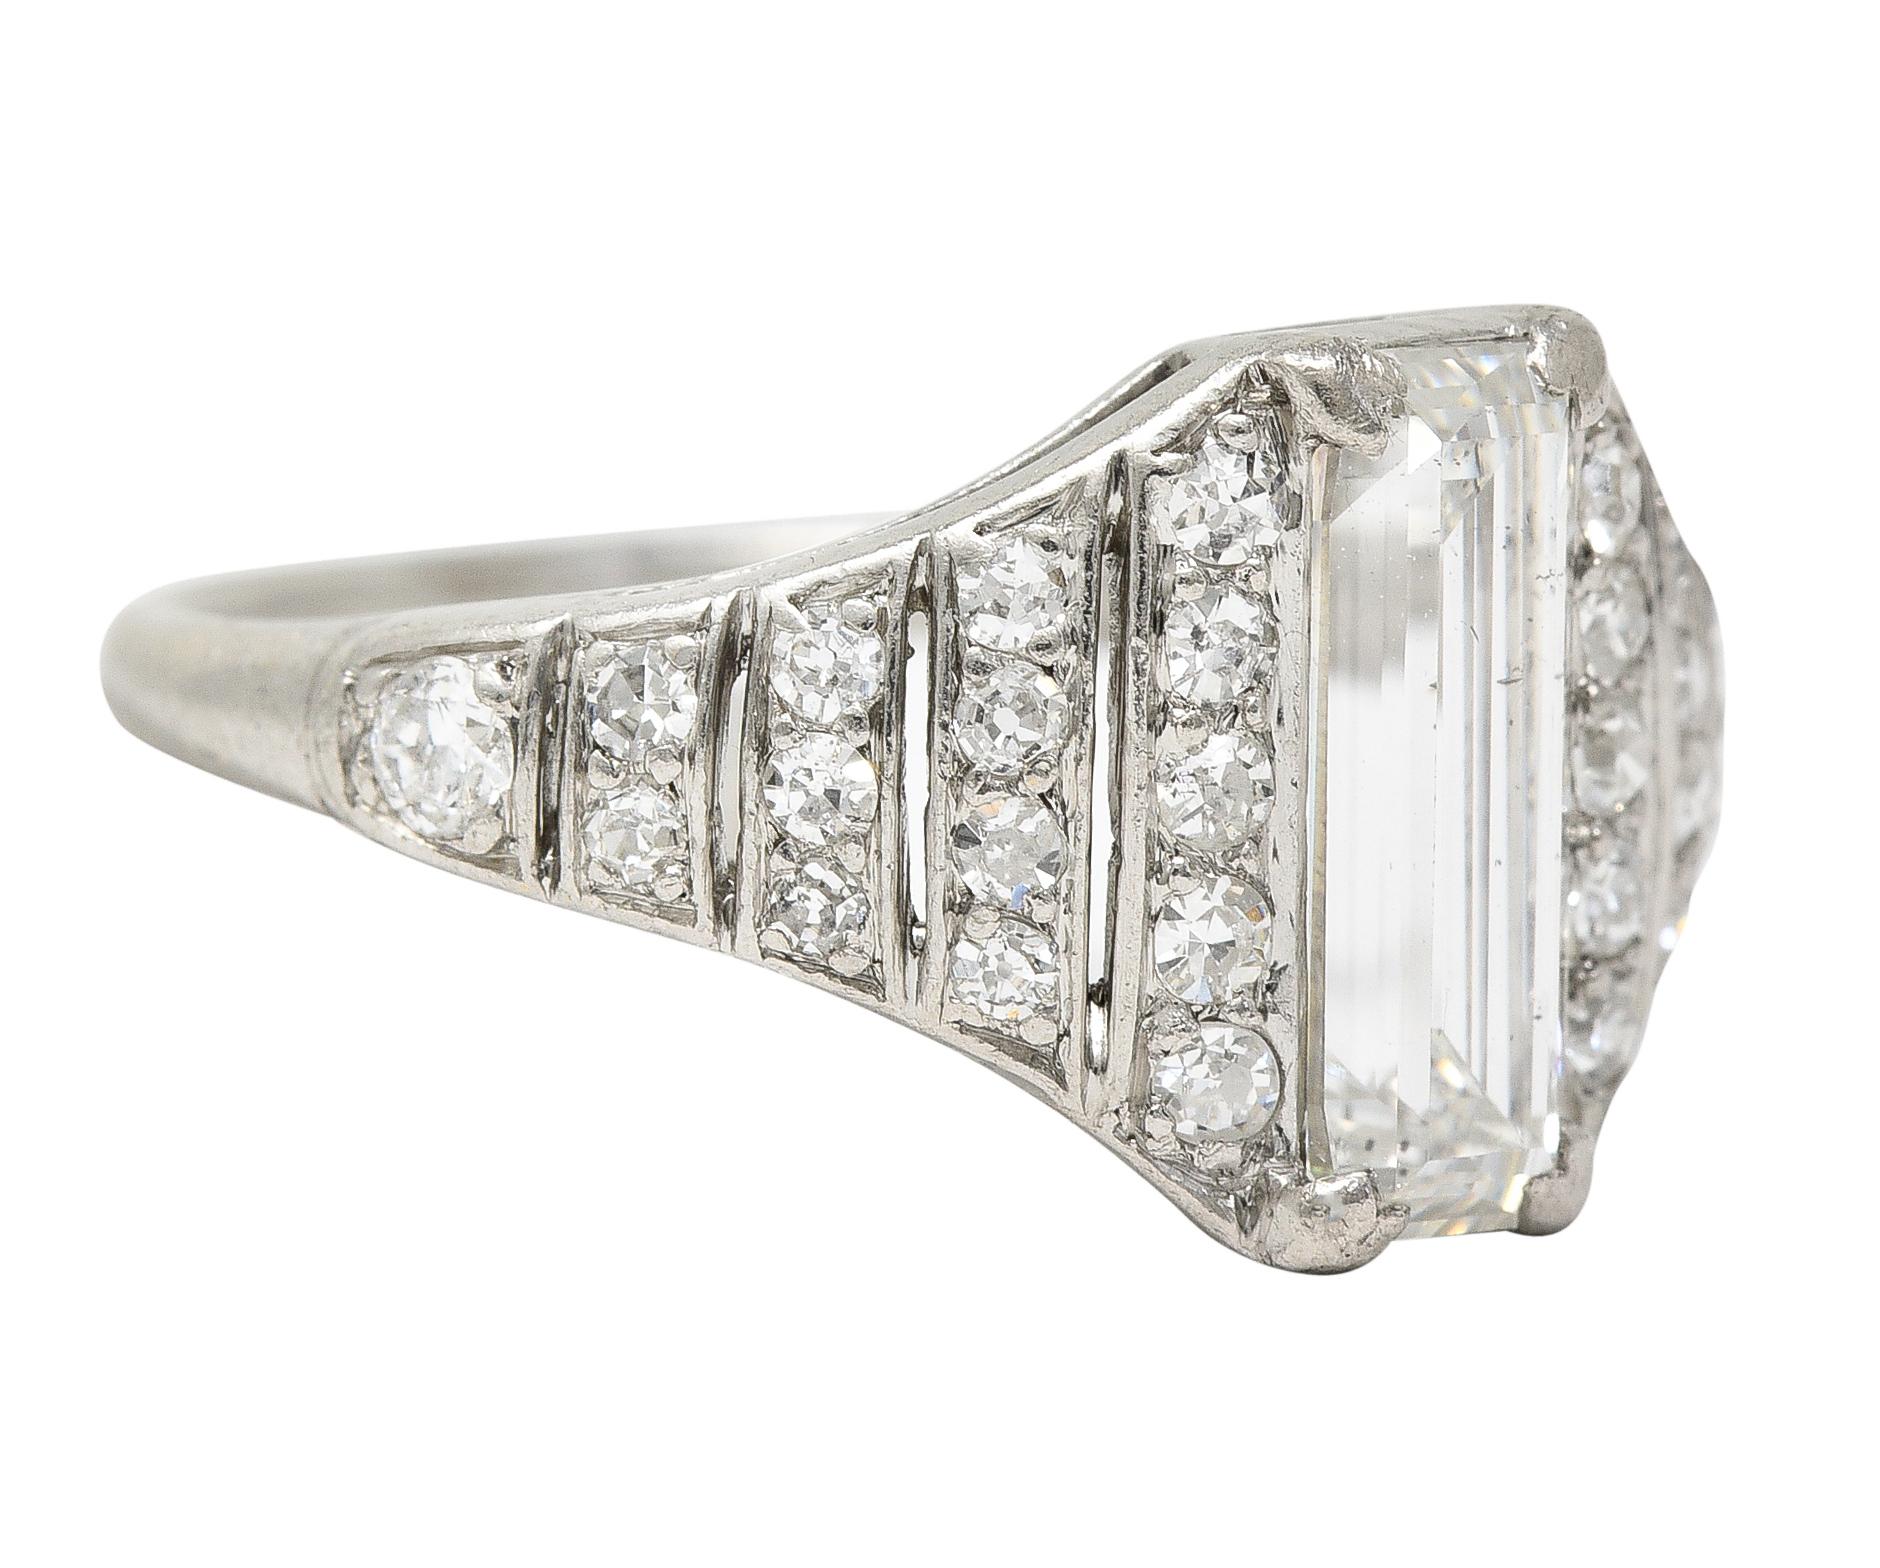 Centering a baguette cut diamond weighing approximately 1.41 carats - G color with SI1 clarity. Prong set and flanked by pierced tapered shoulders with rows of bead set diamonds. Old European cut and weighing approximately 0.34 carat total. G/H